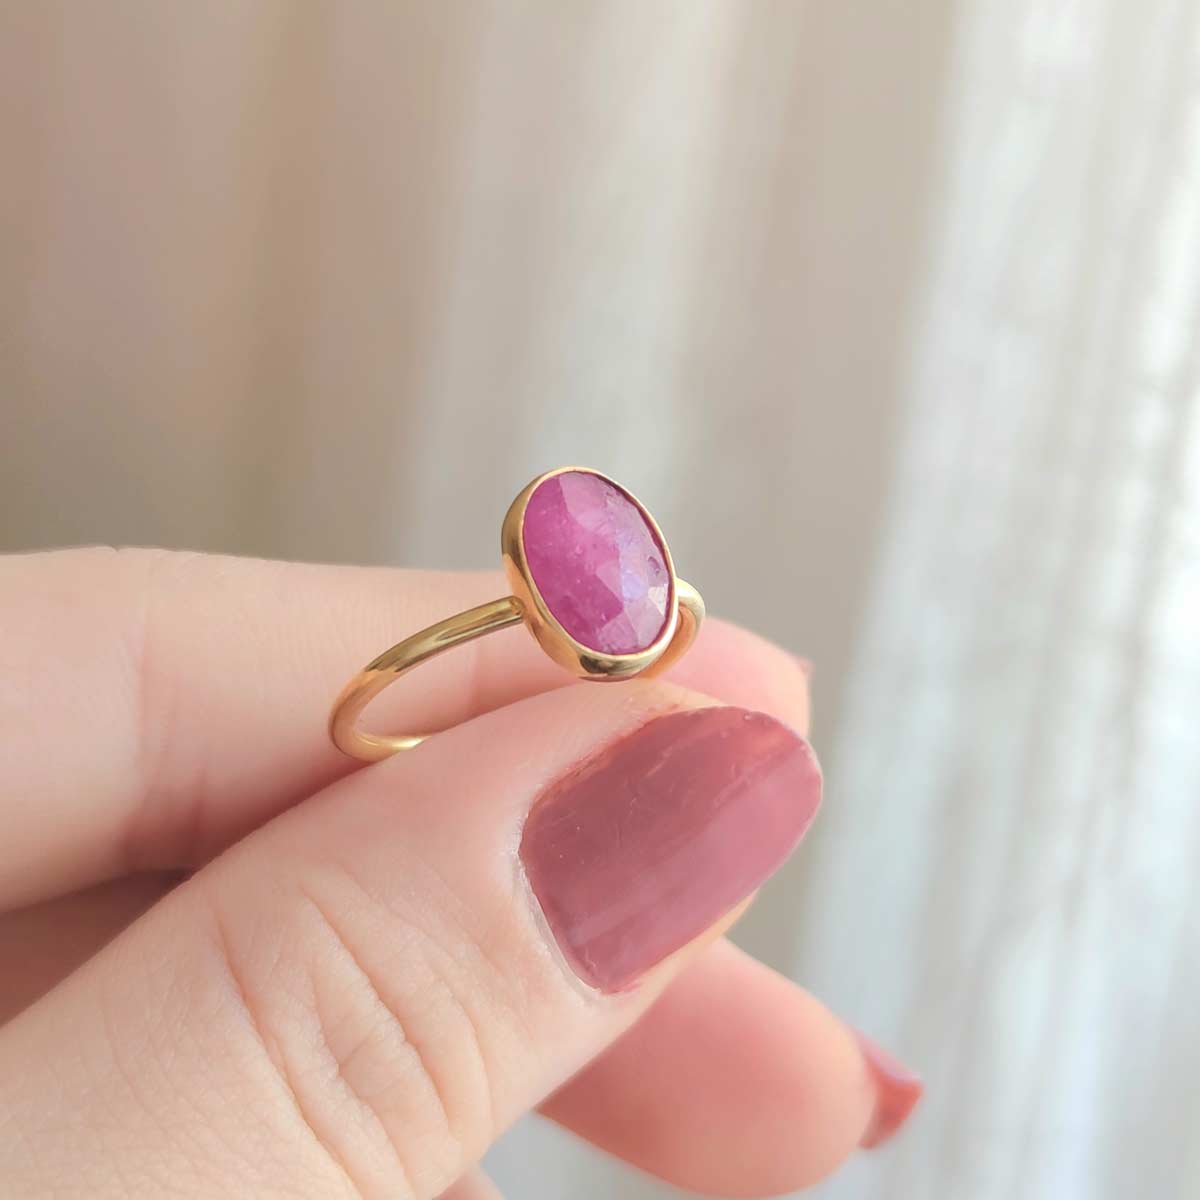 Buy Silver Ruby Ring, Sterling Silver Stacking Rings, Genuine Ruby Ring, Ruby  Stone Jewelry, Small Silver Rings, Birthstone Stacking Rings Online in  India - Etsy